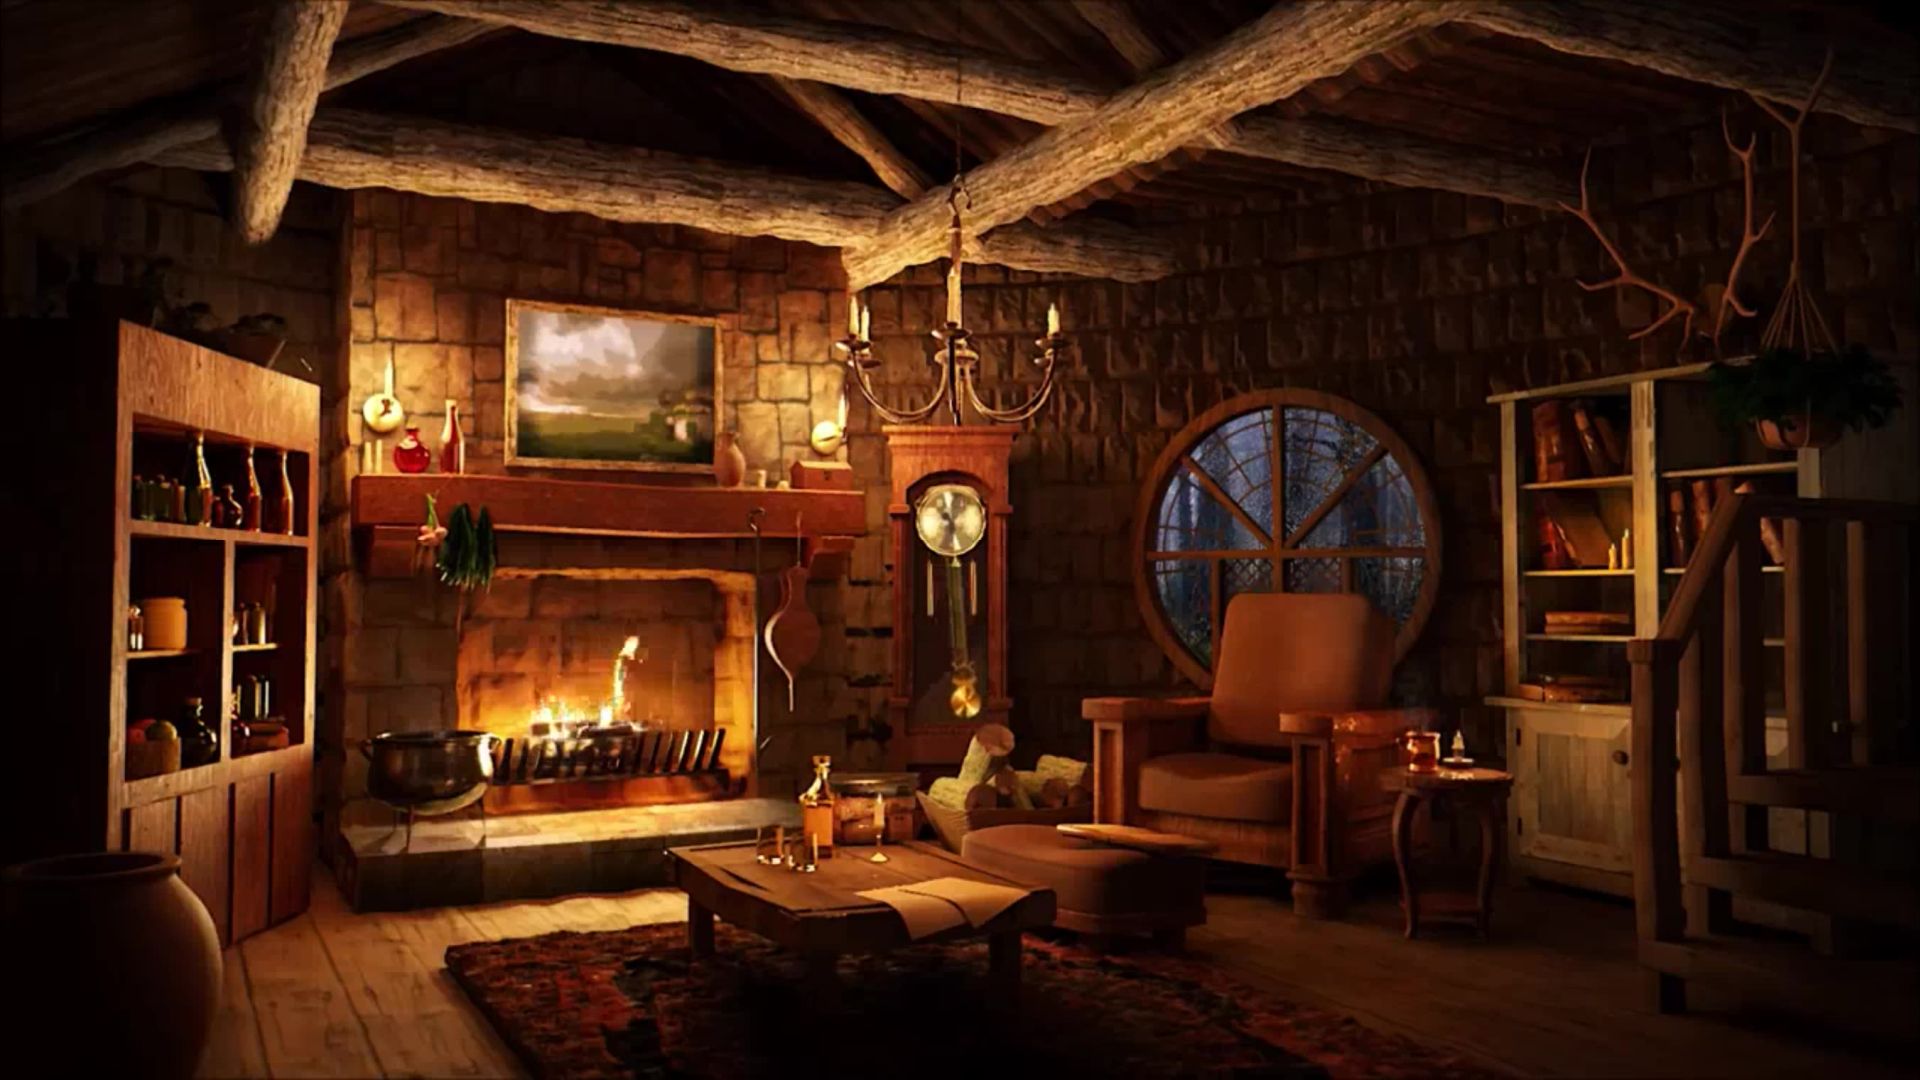 Warm Ambience wallpaper in 1920x1080 resolution